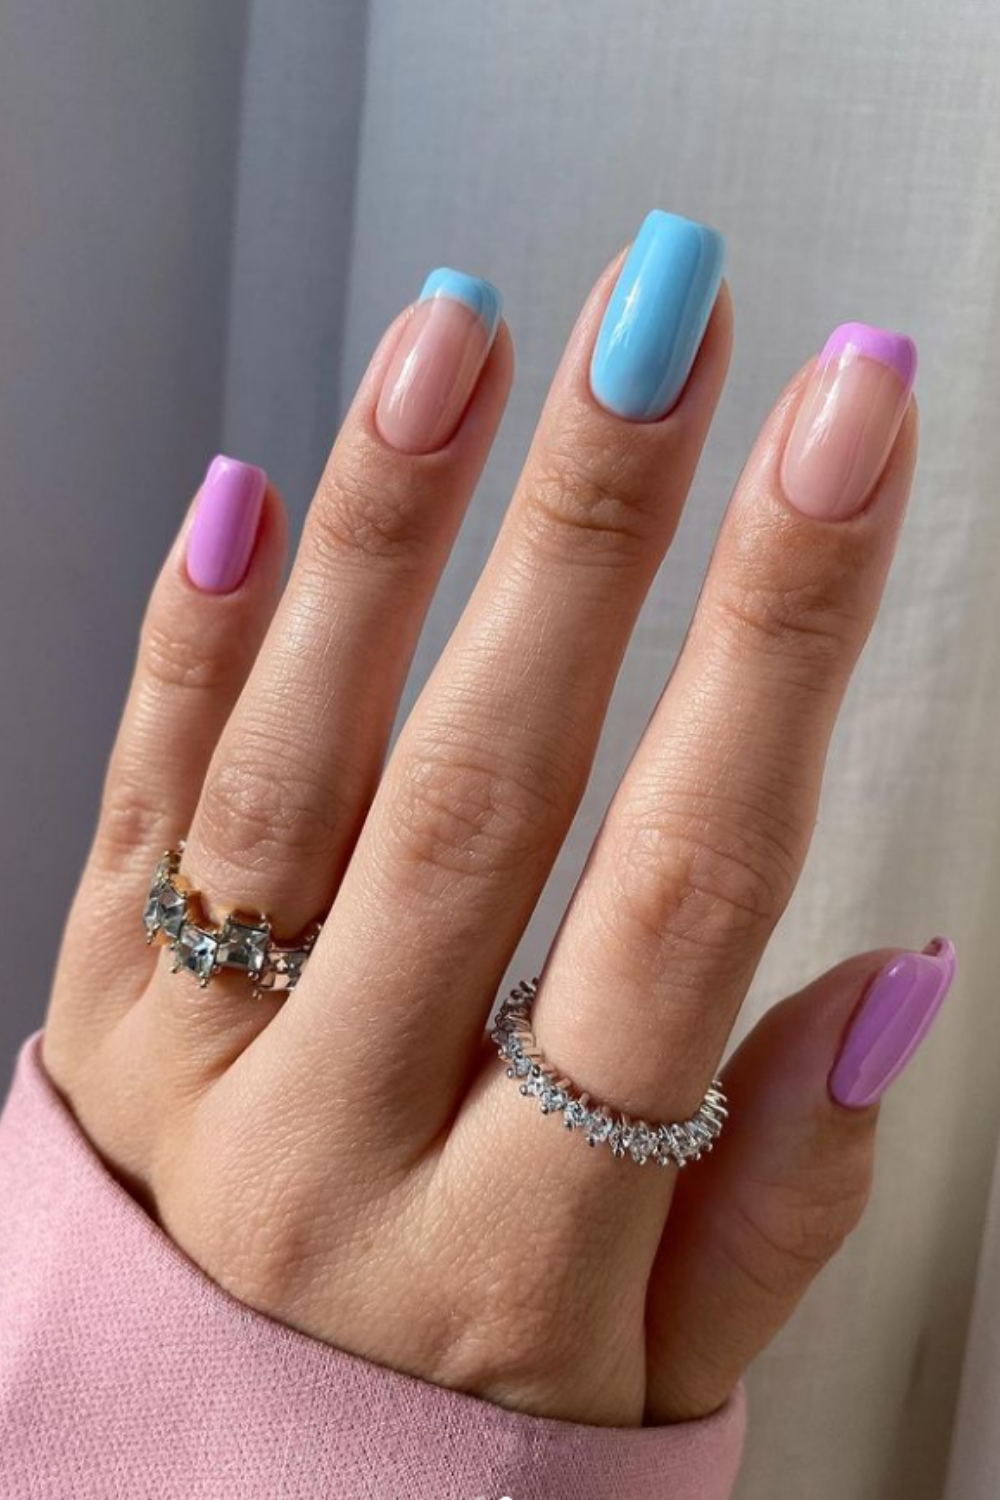 Short Acrylic Nails Art with Coffin Shape for Autumn 2021